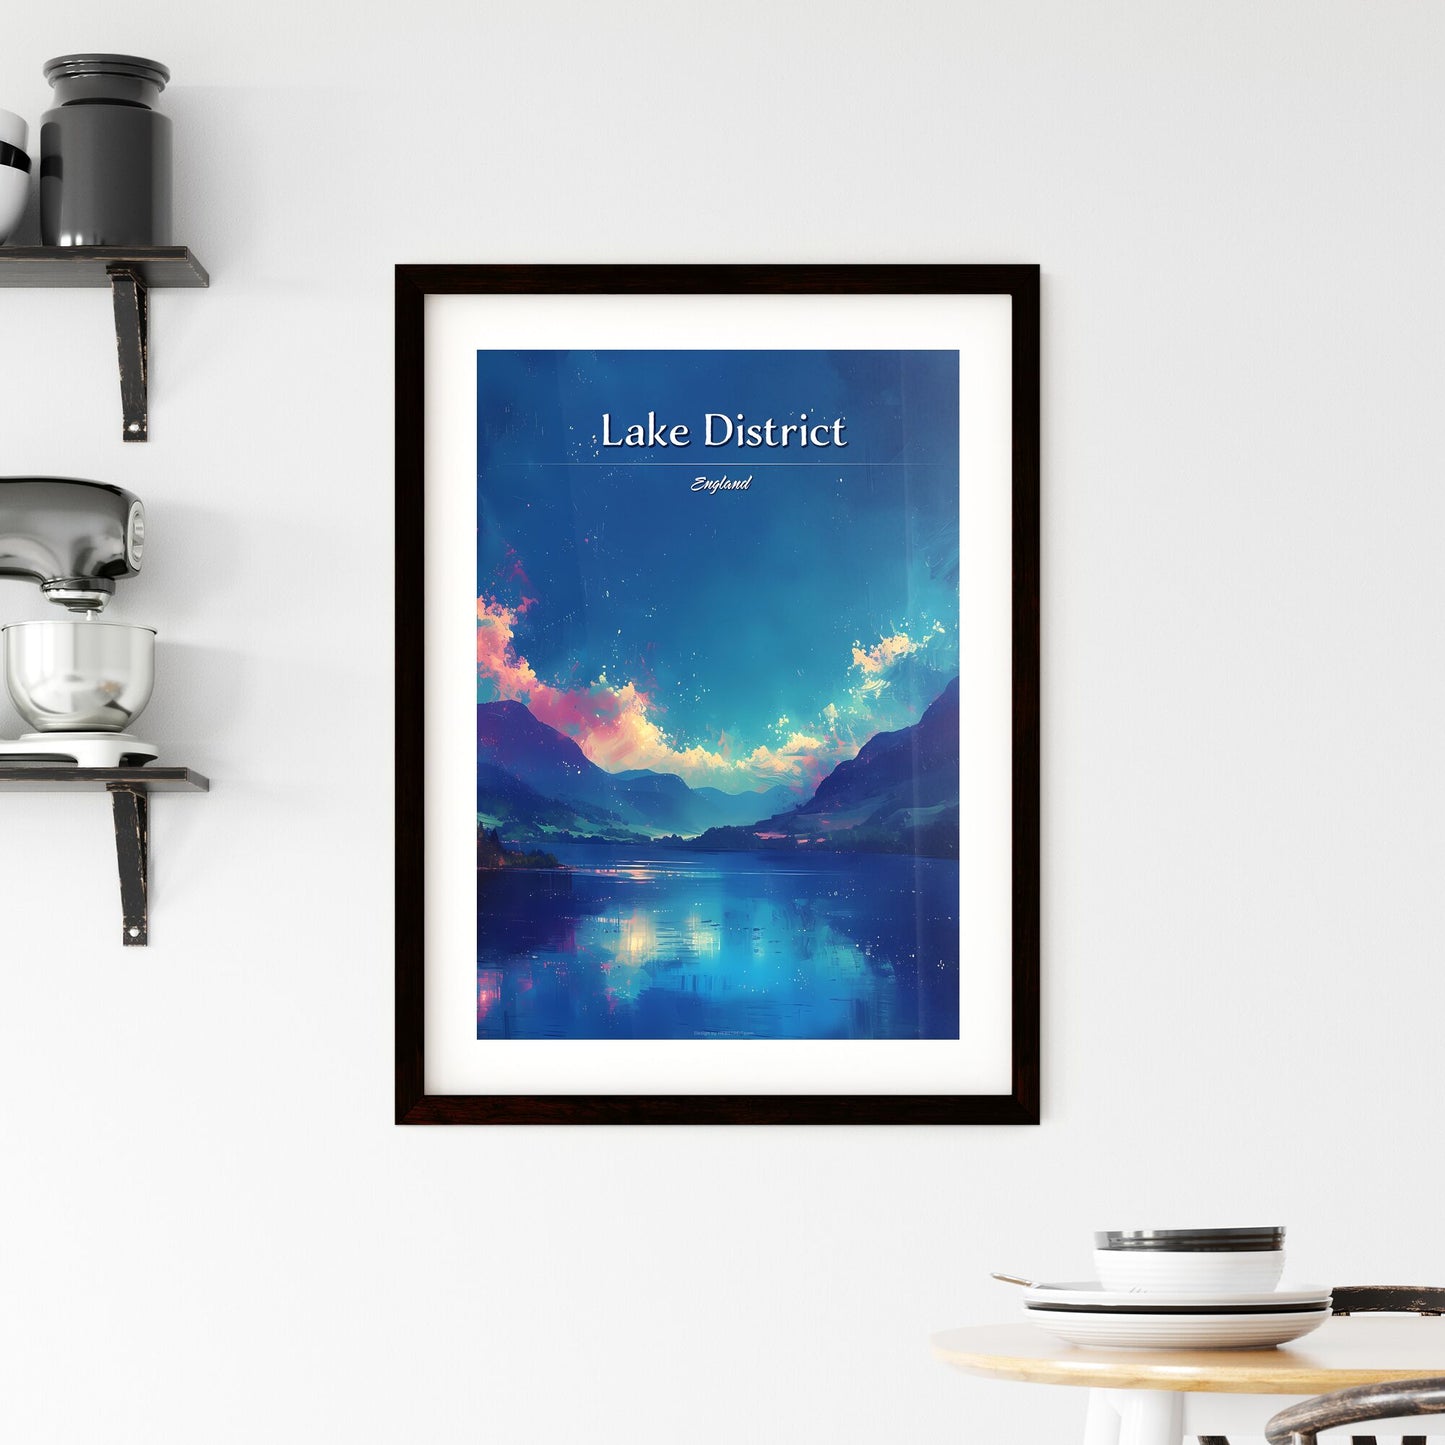 Lake District, England - Art print of a lake with mountains and clouds Default Title